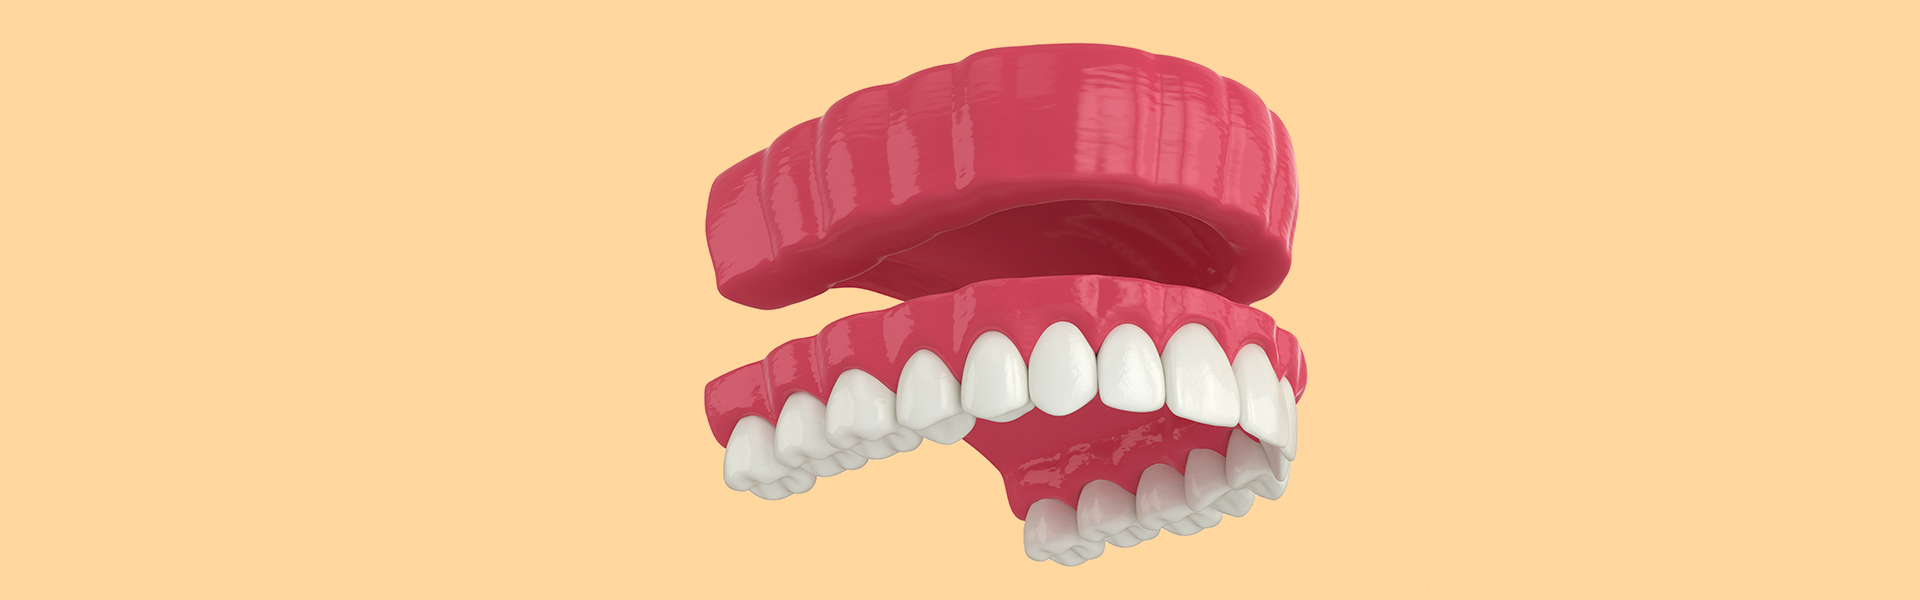 5 Things To Know Before Considering a Dental Bridge